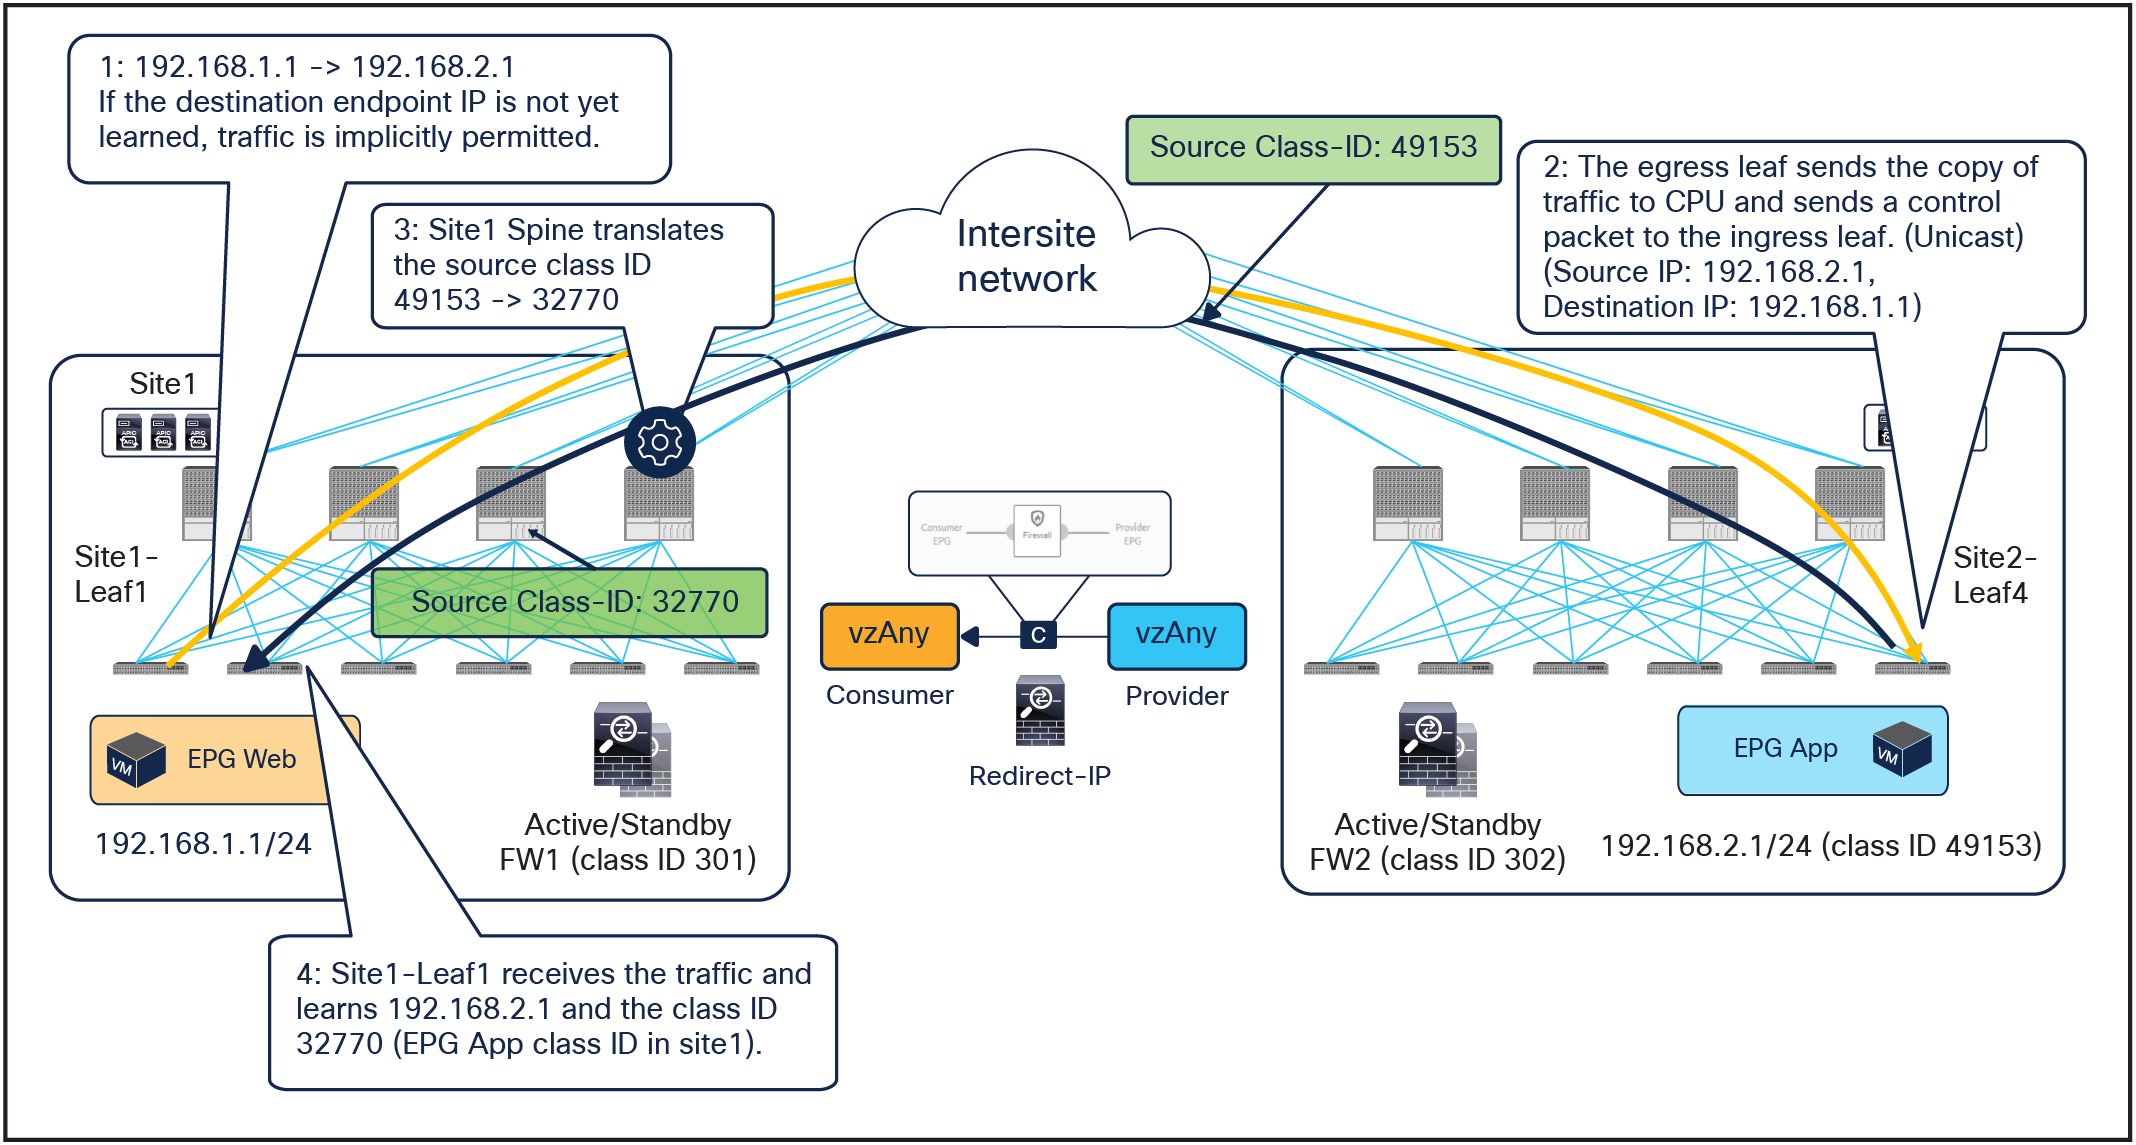 Conversational learning for endpoint-to-endpoint communication (unicast)